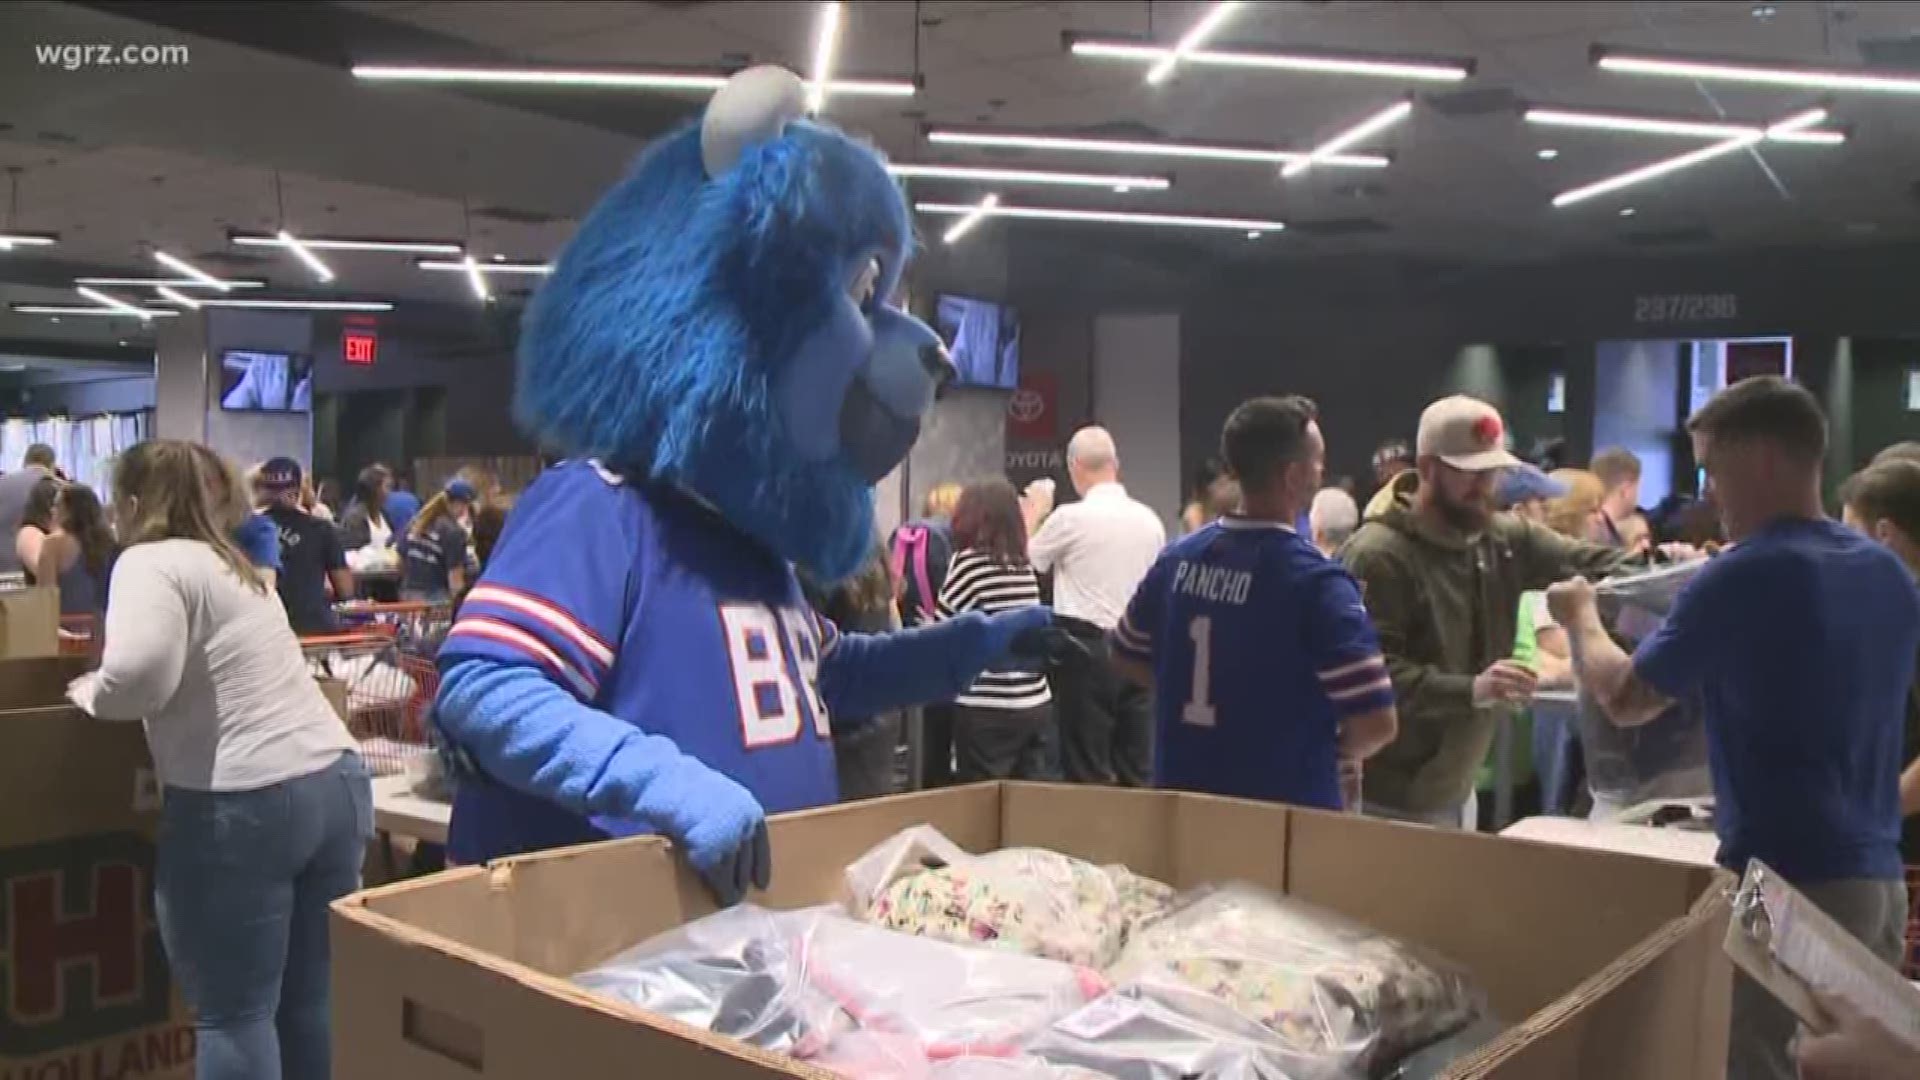 It was a big day at New Era Field where hundreds of volunteers spent the afternoon filling backpacks with school supplies in honor of Pancho Billa.